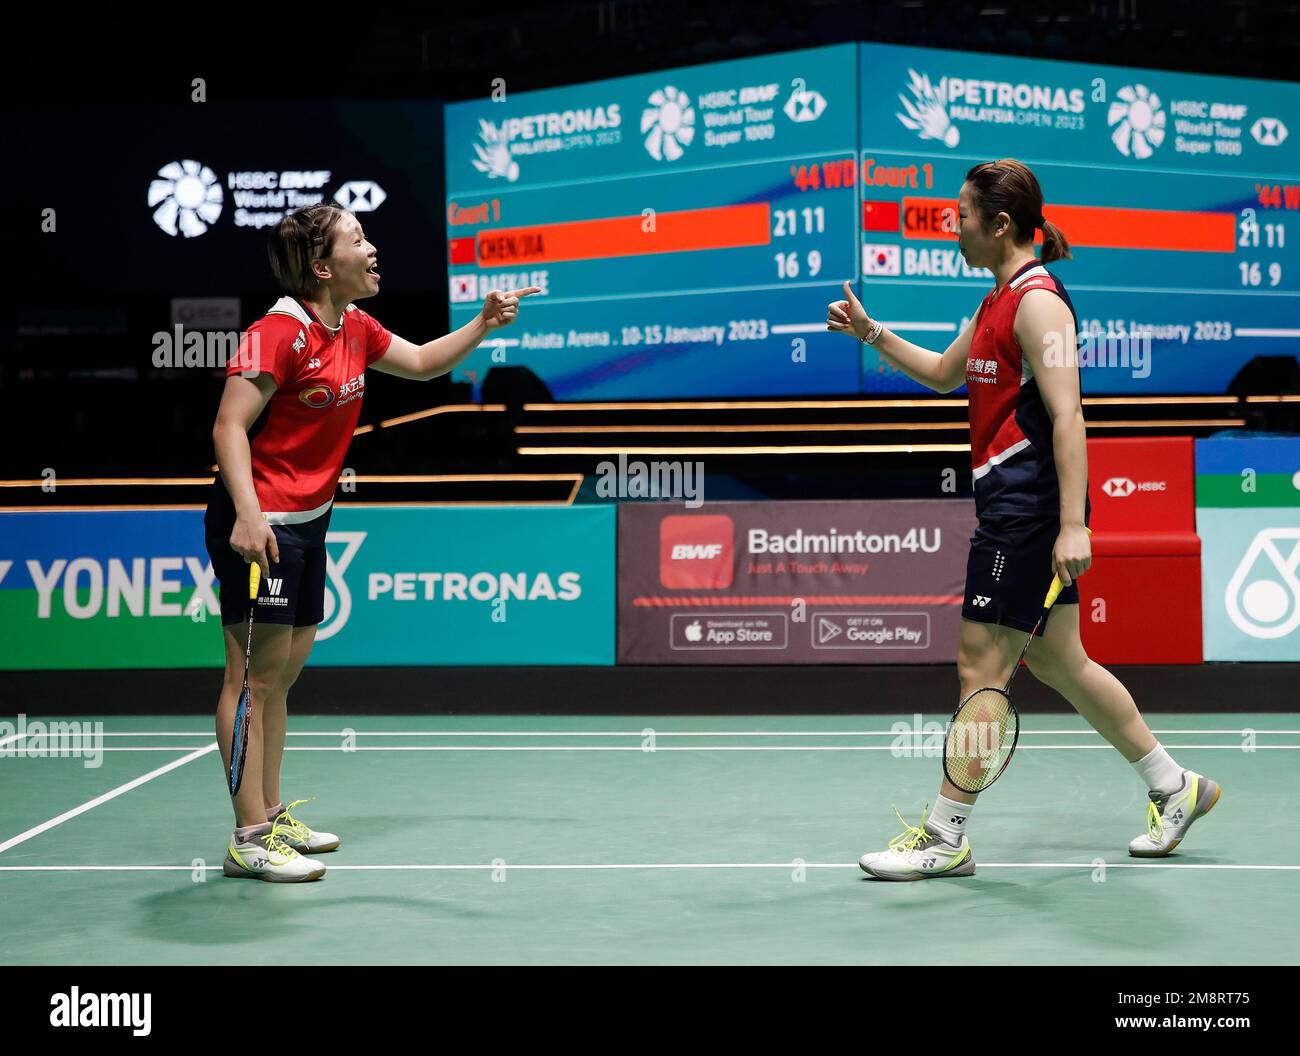 Kuala Lumpur, Malaysia. 15th Jan, 2023. Chen Qing Chen (L) and Jia Yi Fan of China react as they play against Baek Ha Na and Lee Yu Lim of Korea during the Women Doubles Finals match of the Petronas Malaysia Open 2023 at Axiata Arena.Chen Qing Chen and Jia Yi Fan of China won with scores; 21/21 : 16/10 Credit: SOPA Images Limited/Alamy Live News Stock Photo